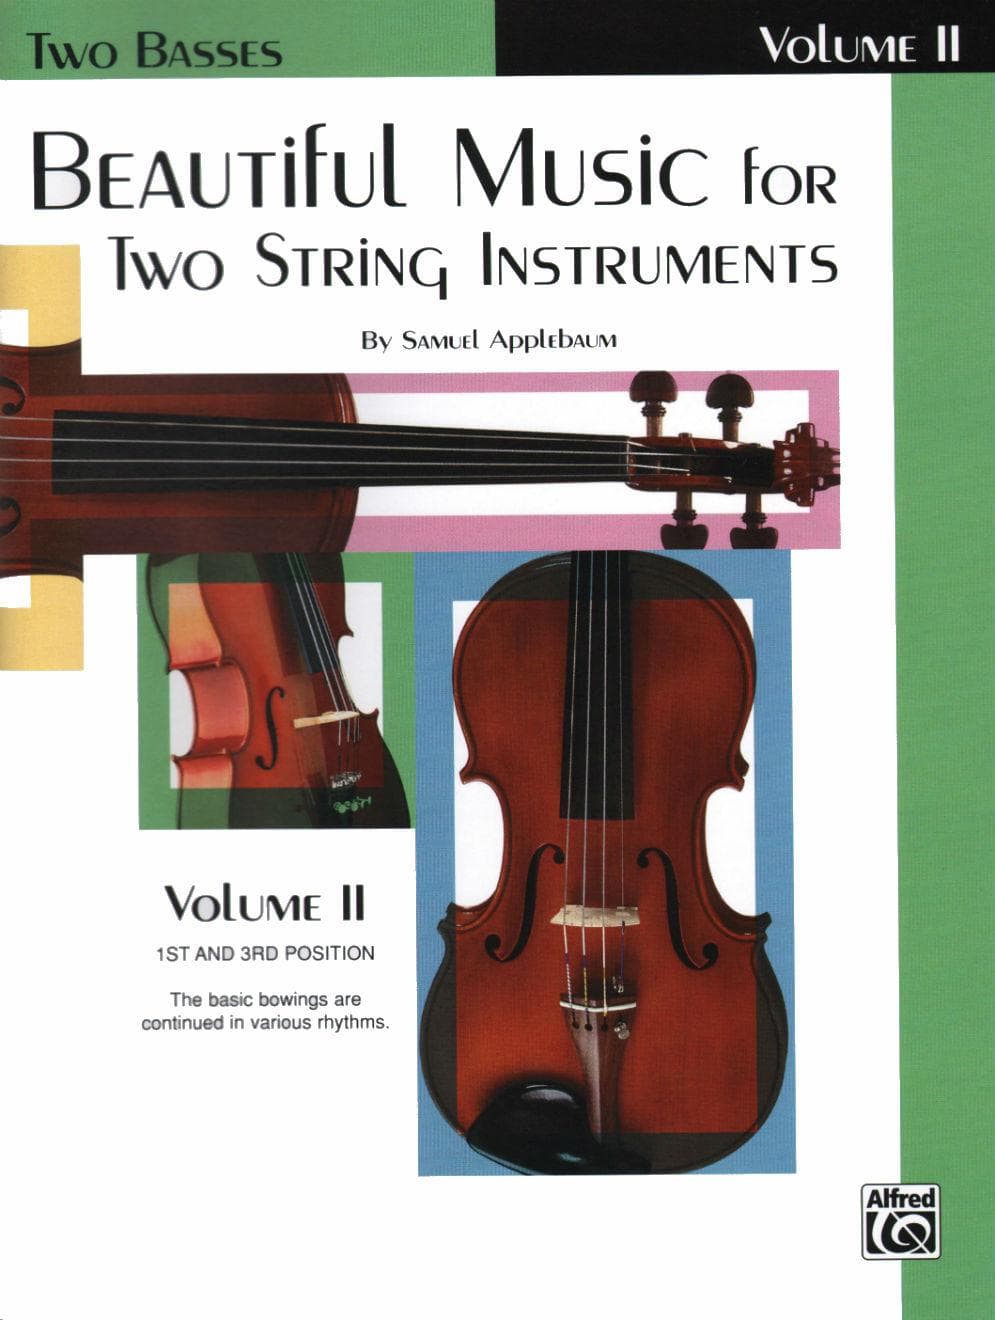 Applebaum, Samuel - Beautiful Music For Two String Instruments - Volume 2 for Double Bass - Belwin/Mills Publication